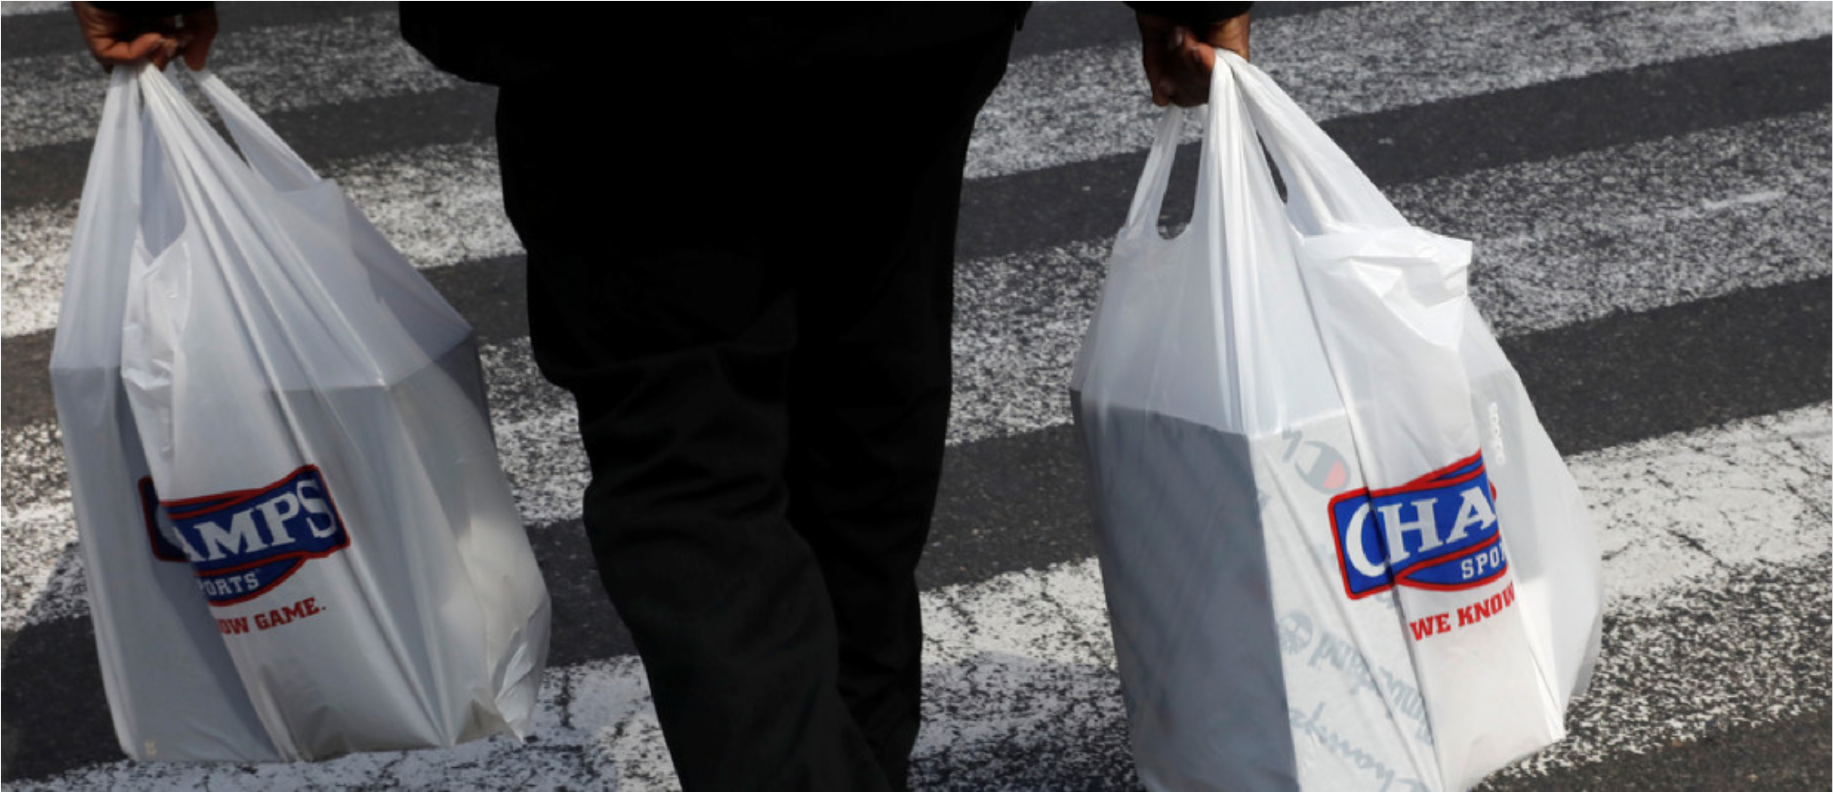 U.S. Bill Would Ban Unnecessary Single-Use Plastic, Pause New Plastic Production